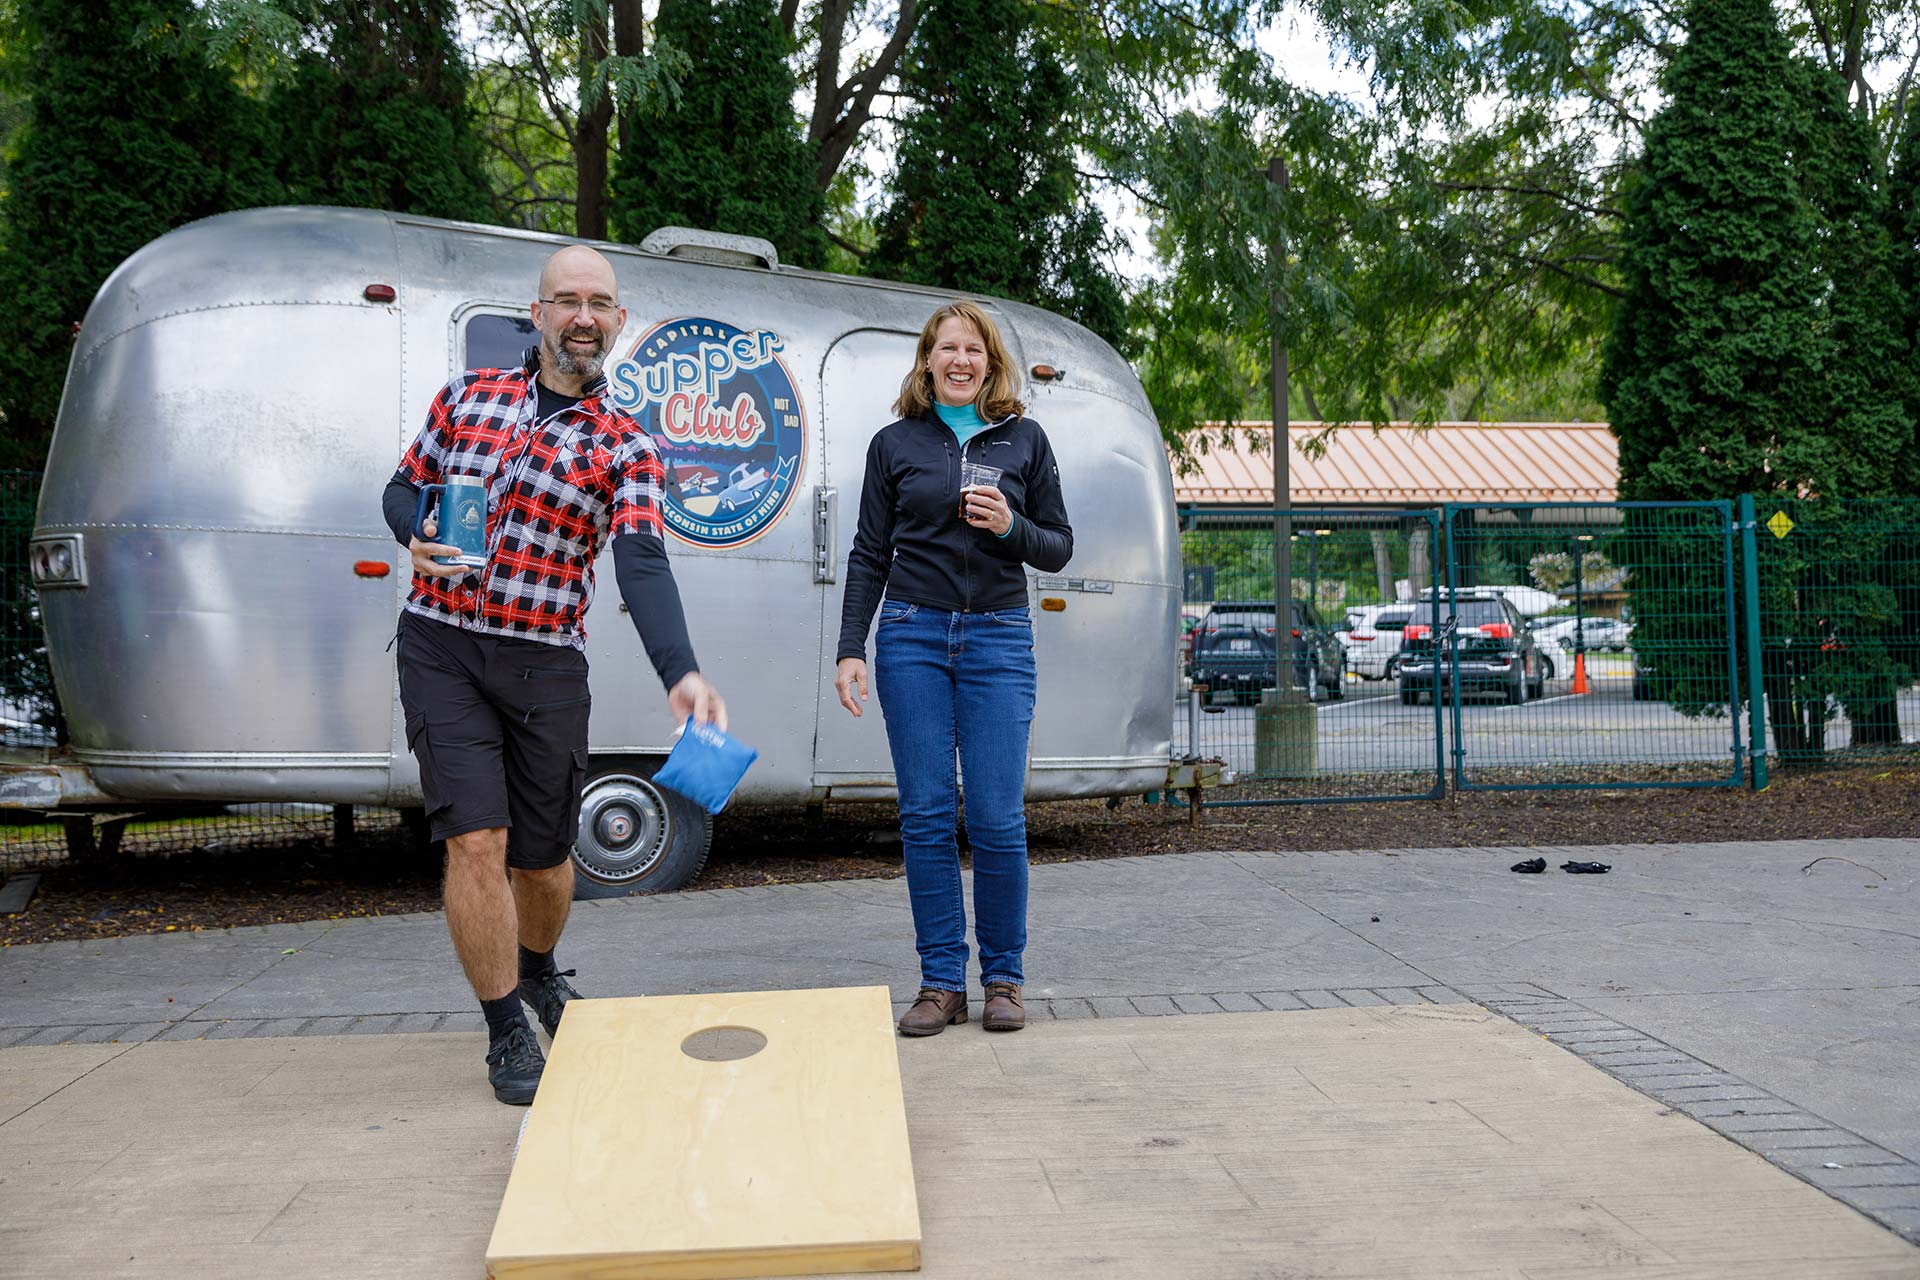 a man and a woman playing a game in front of a trailer